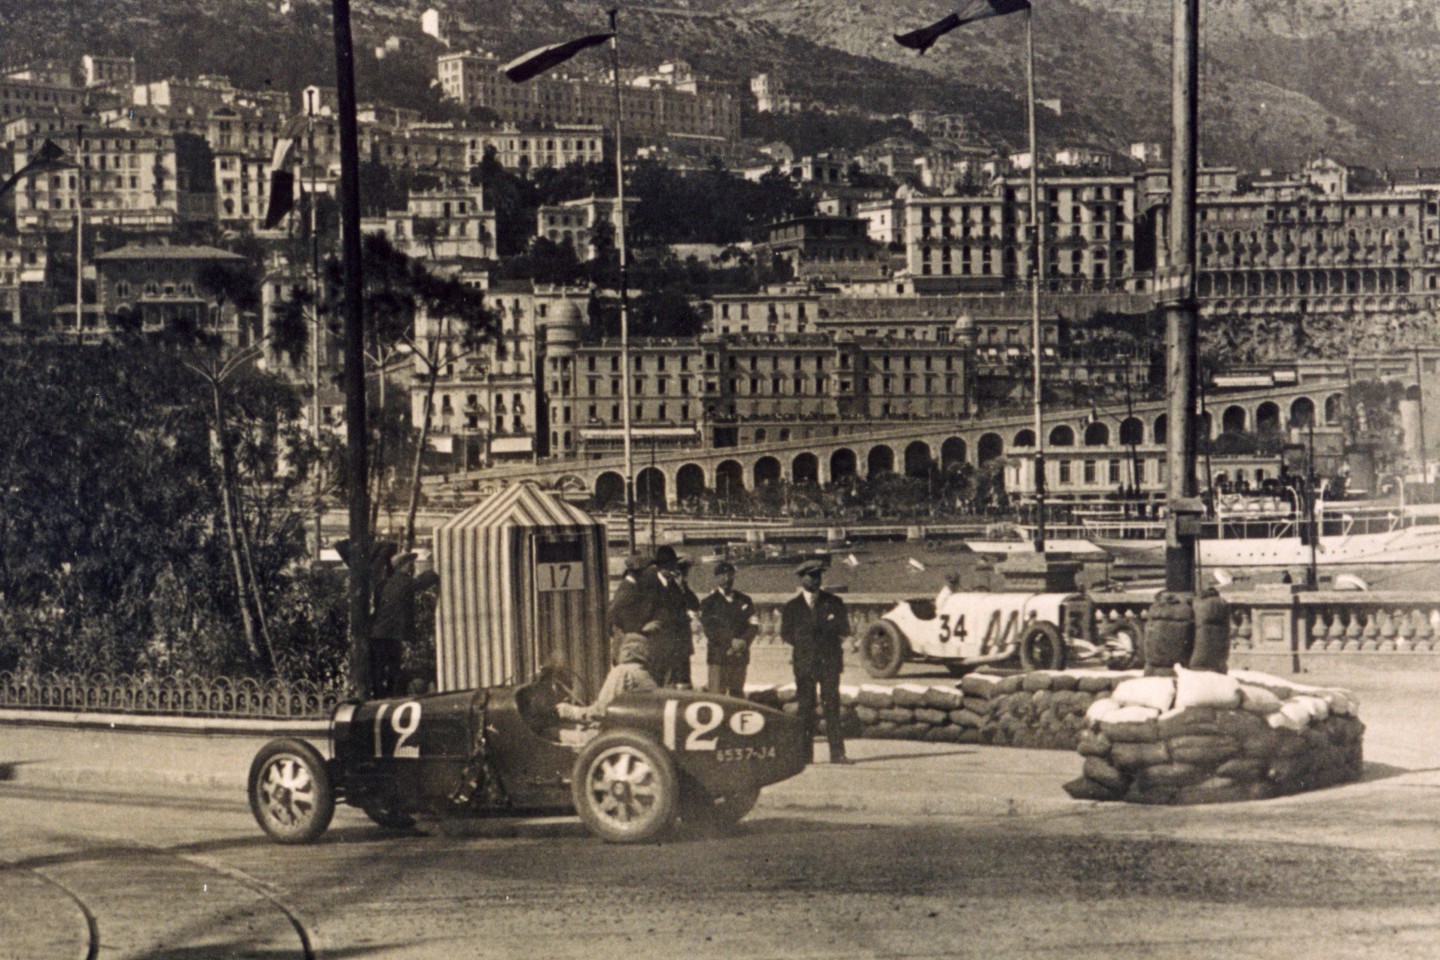 The first Monaco Grand Prix in 1929 saw Bugatti lock out the front row and qualify 1, 2, 3, 5, and 6th making up more than half the cars in the race and storming the results, finishing 1, 2, 4, 5, 6, and 7th, with only the Mercedes-Benz “works” SSK preventing a clean sweep. Pictured is the winner, British driver William Grover-Williams, one of those British larger-than-life characters who subsequently turned out to be a real-life “James Bond.” It turned out that Grover-Williams secretly worked for British Military Intelligence and during World War II would be captured, identified as the head of a major spy network and executed by the Nazis.